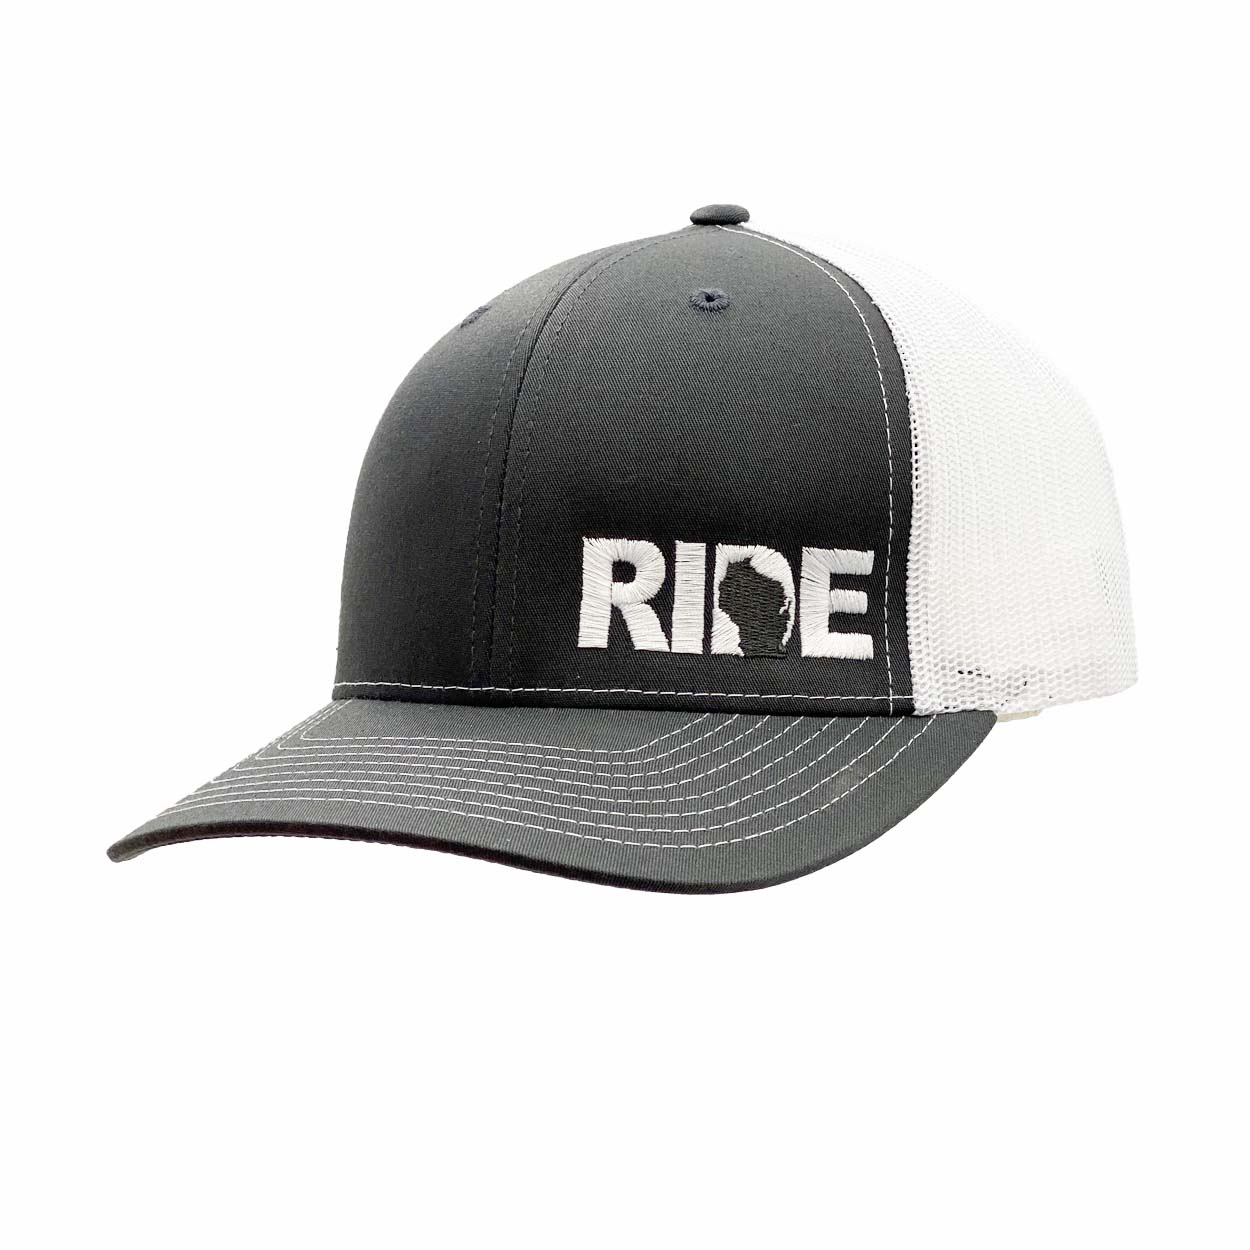 Ride Wisconsin Night Out Embroidered Snapback Trucker Hat Gray/White